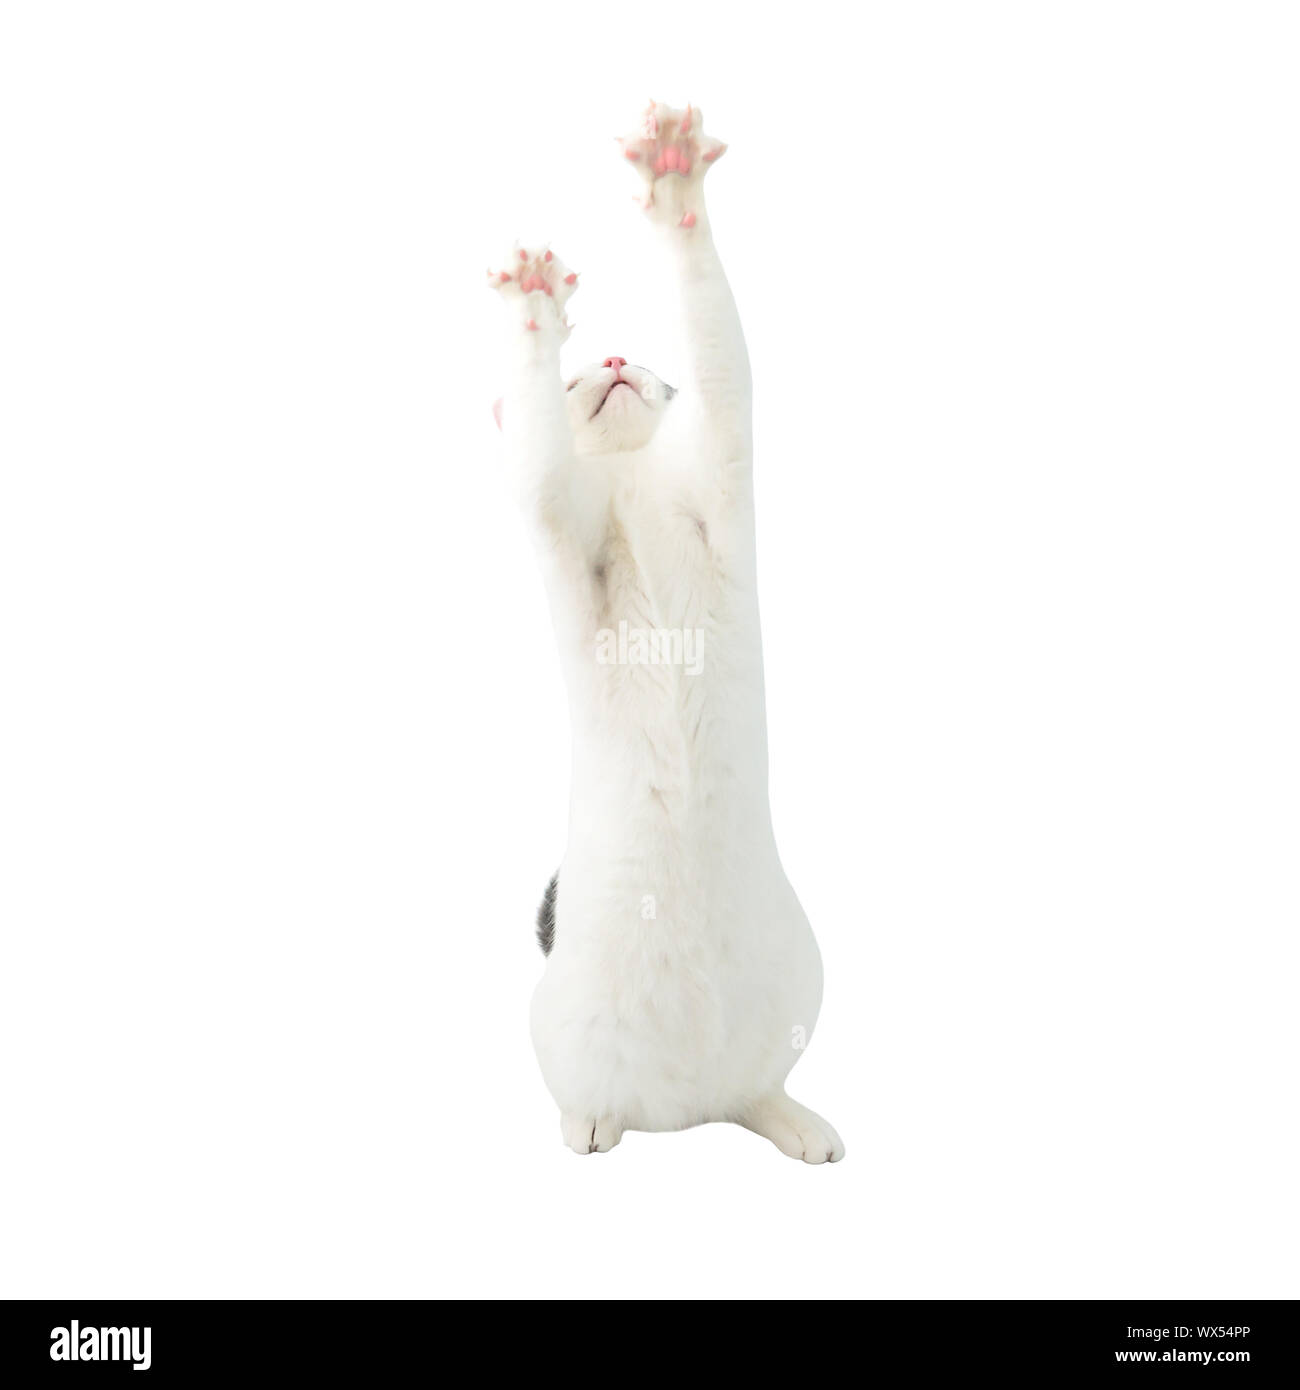 White young cat with black tail Stock Photo